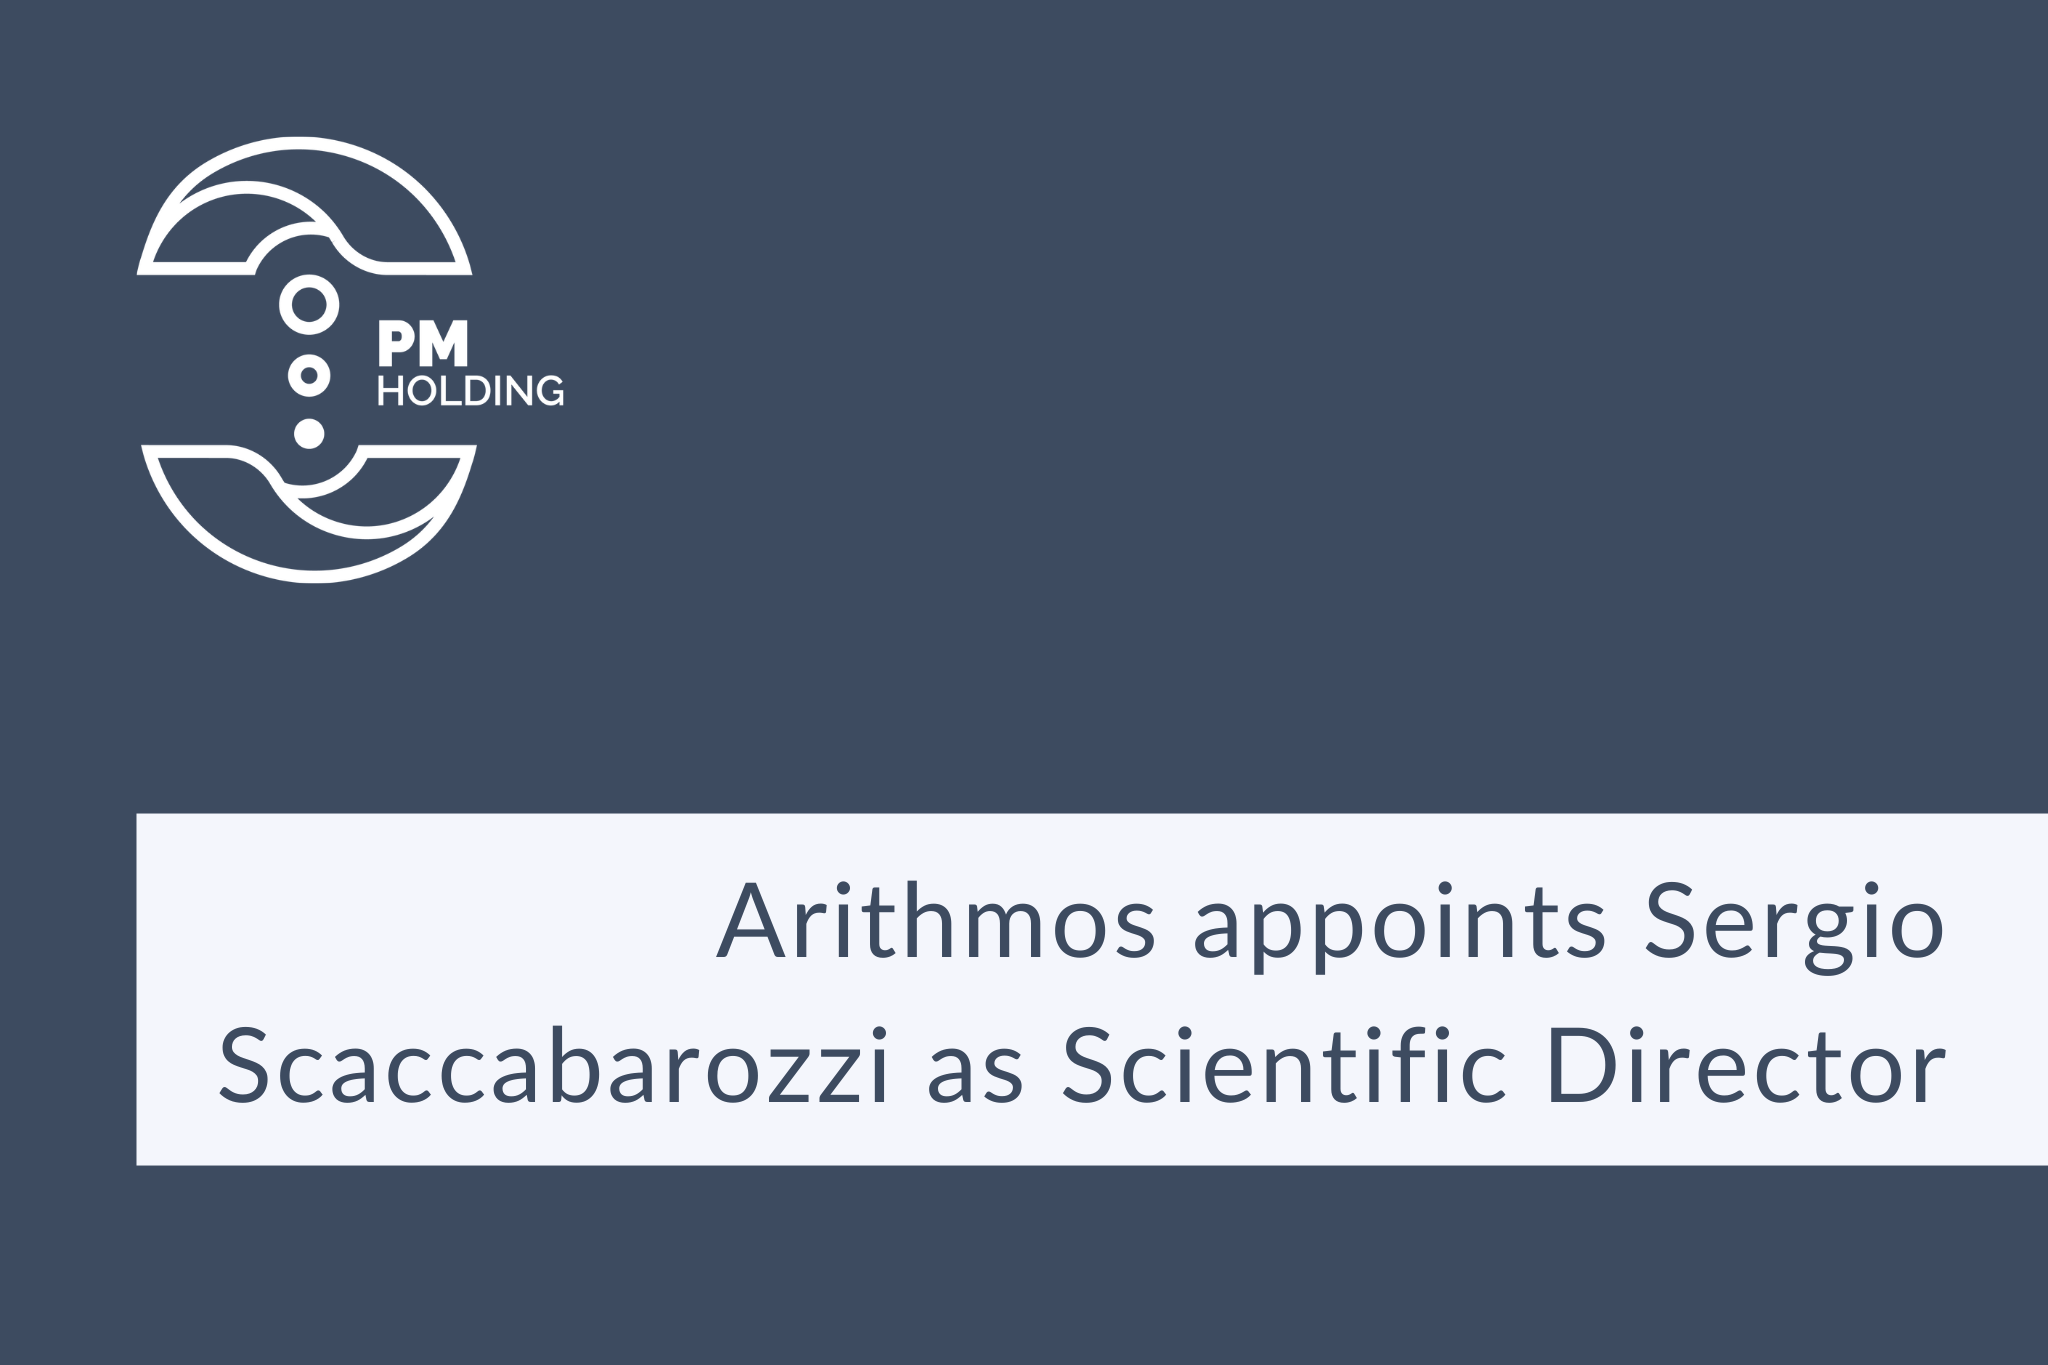 Arithmos appoints Sergio Scaccabarozzi as Scientific Director.